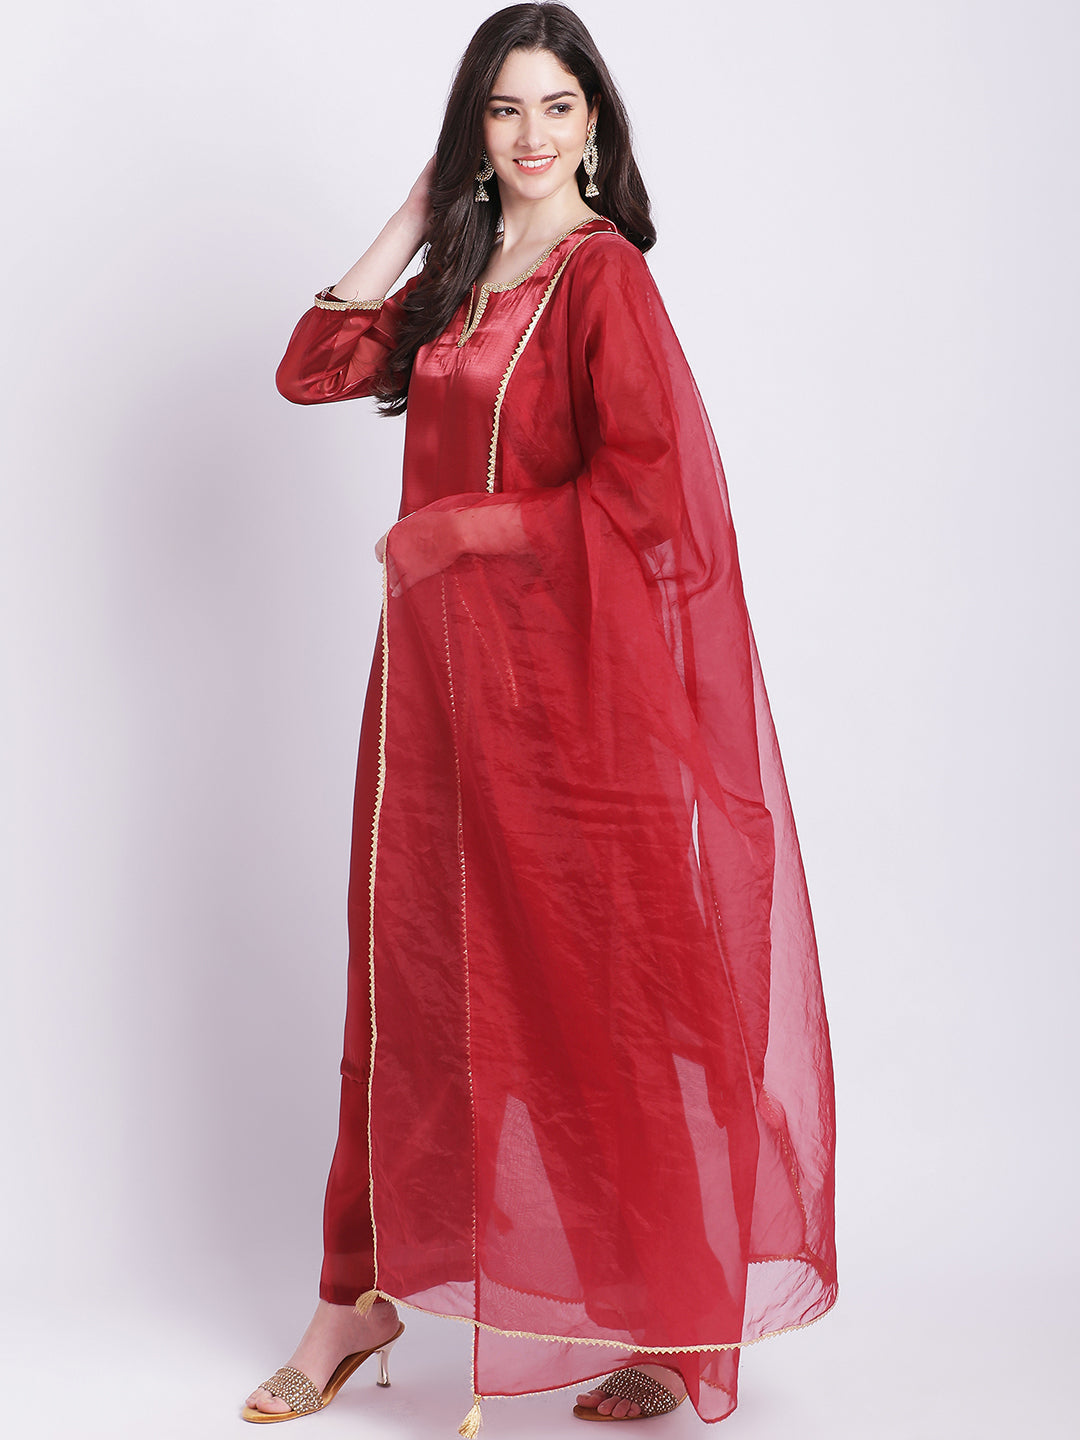 Plain red kurti styled with a contrasting dupatta | Indian designer  outfits, Stylish dress designs, Indian fashion dresses